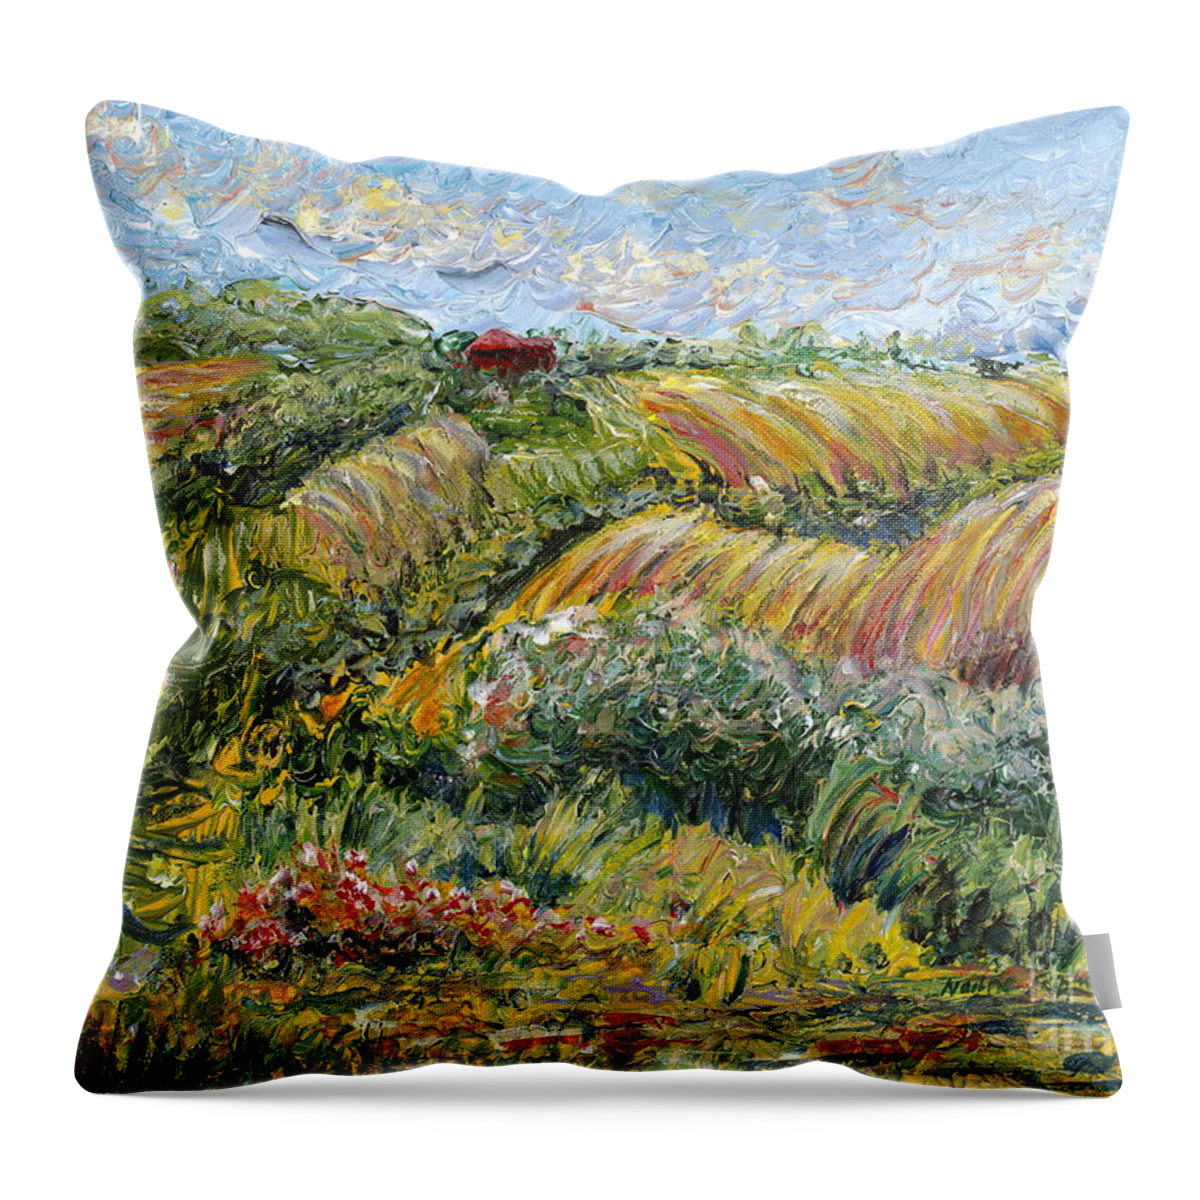 Texture Throw Pillow featuring the painting Textured Tuscan Hills by Nadine Rippelmeyer